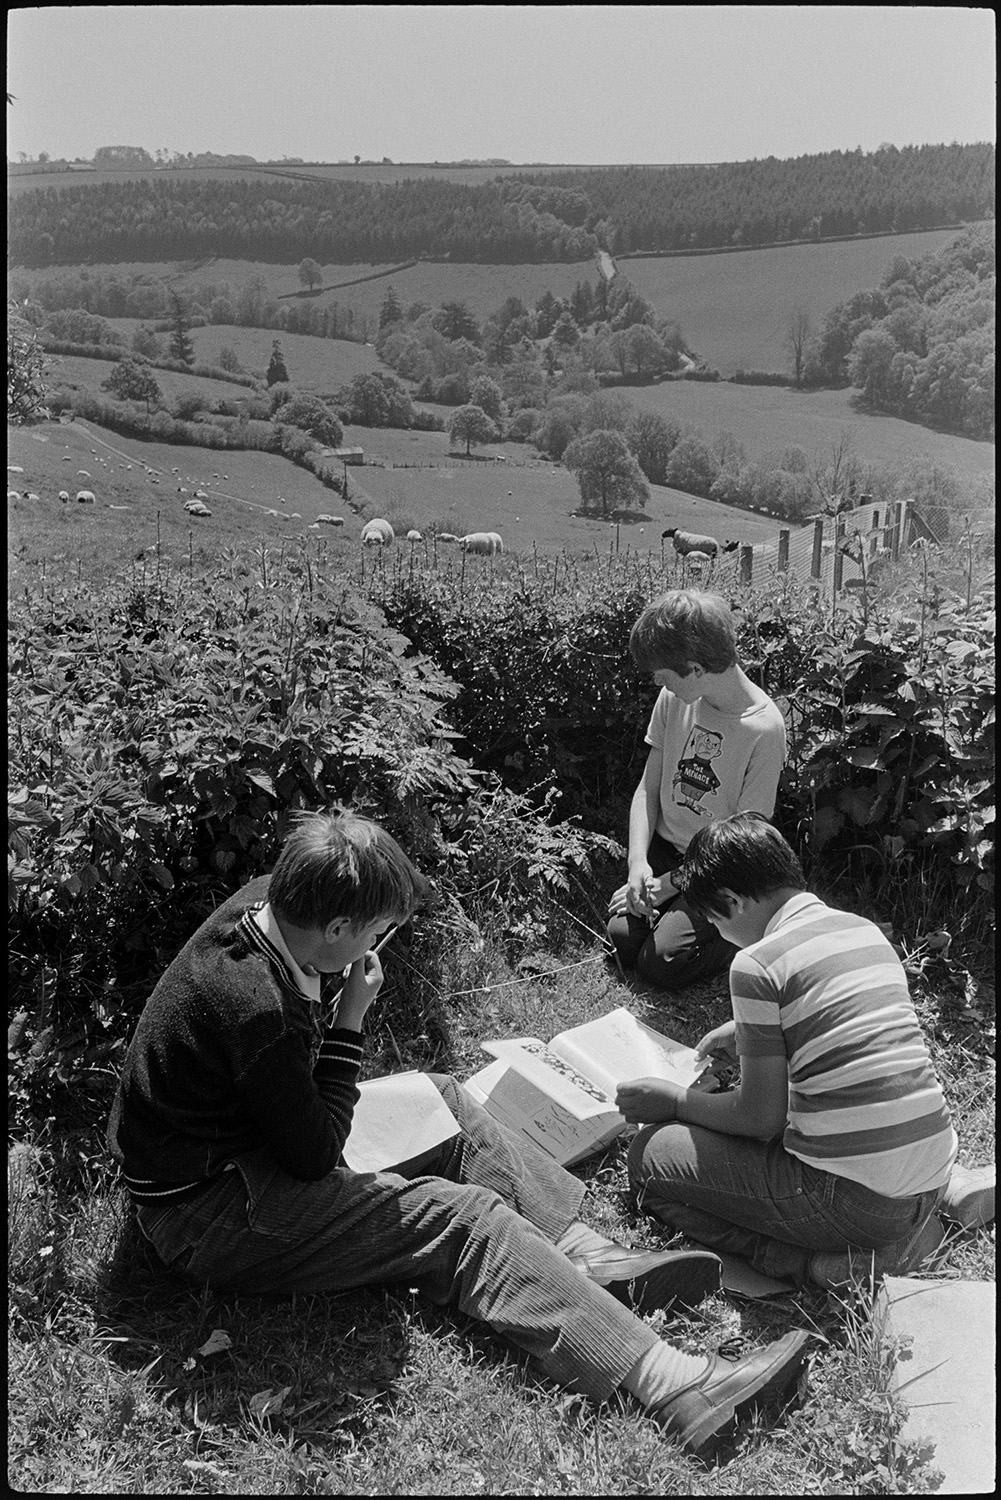 Primary school. Teacher helping pupils. Children working outside in hot sun.
[Three boys from Chulmleigh Primary School studying nature outside in the sunshine. A view of sheep grazing in a field and a distant wooded hillside can be seen in the background.]